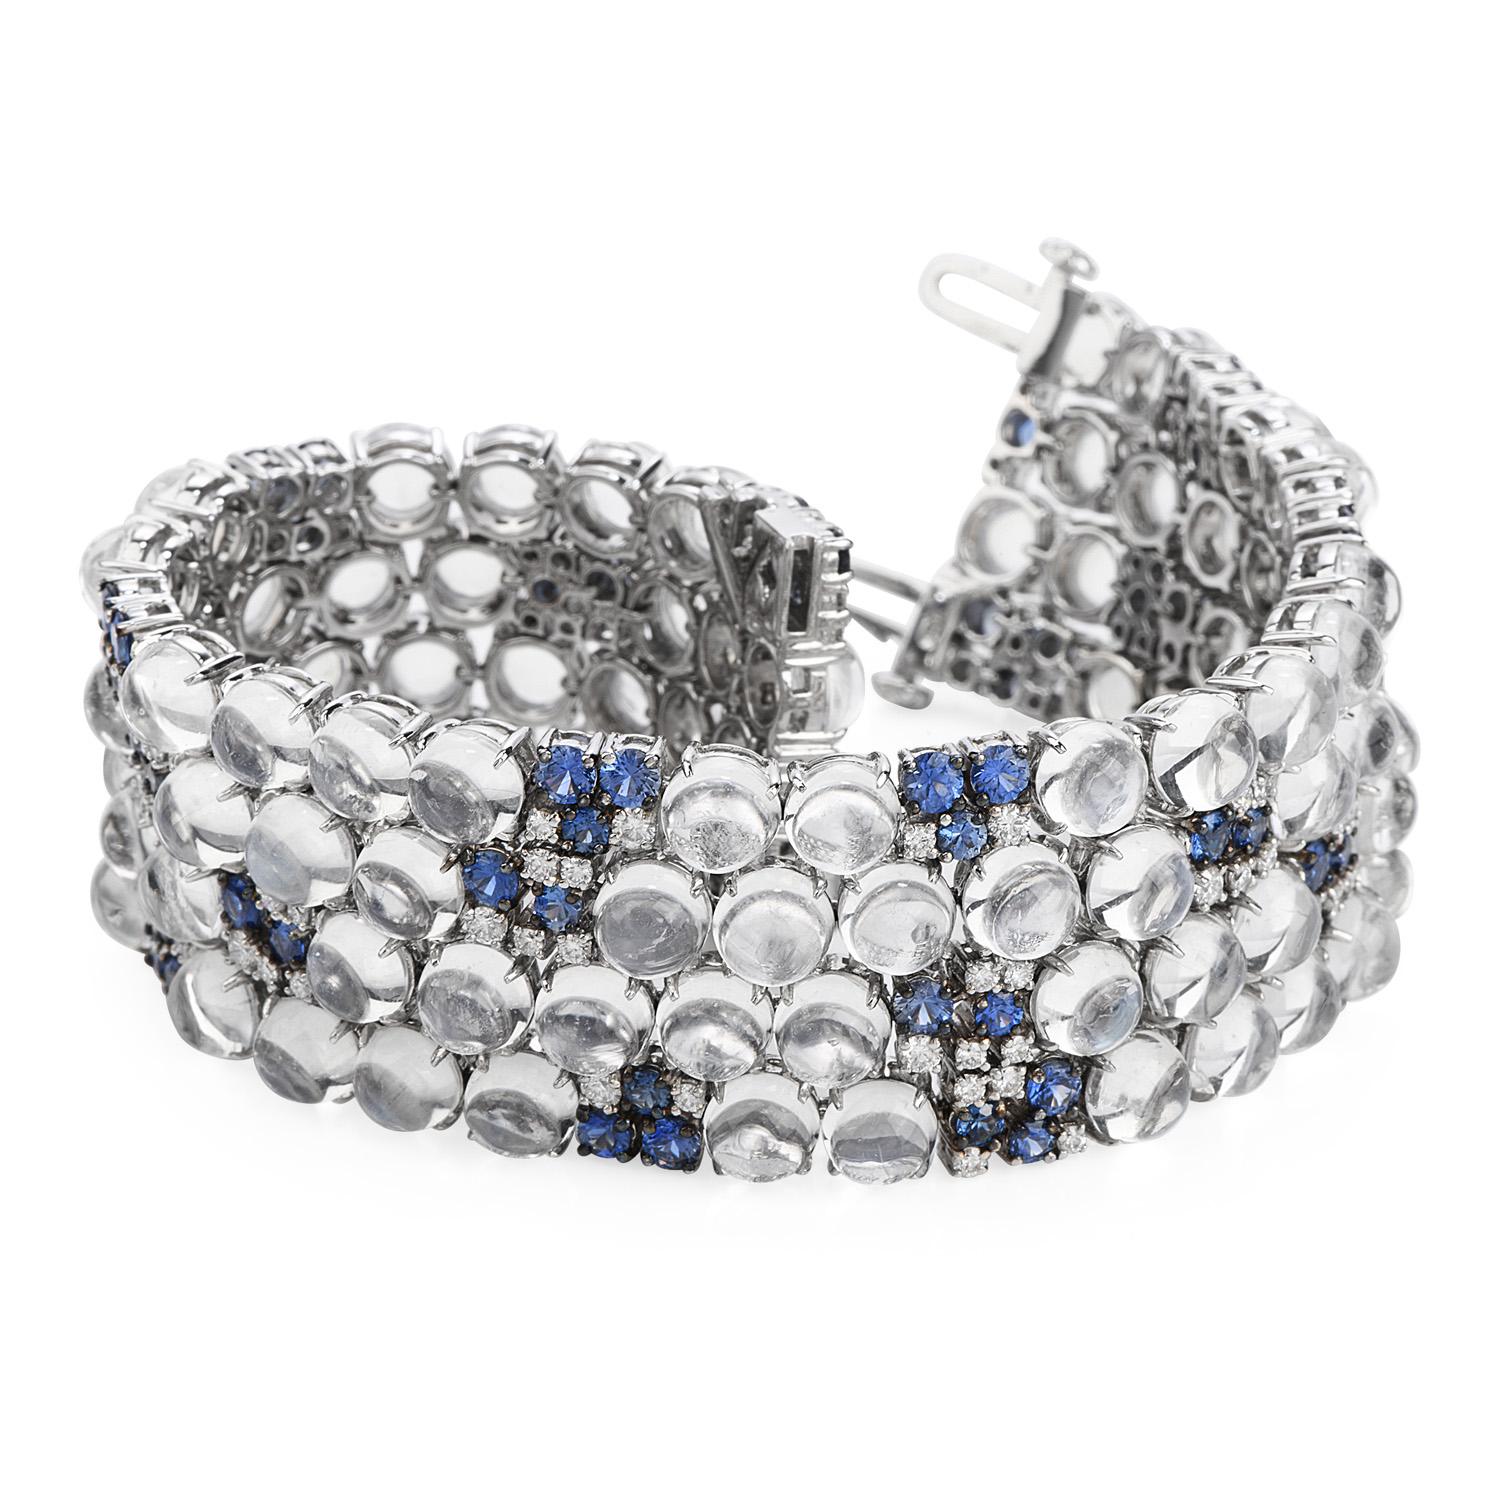 Adorn your arm and complete the look with this 

Statement, Estate, Circa 1980 wide bracelet.  

Crafted in 18K white gold, the intricate pattern has woven throughout both round cabochon cut moonstone, 

Amidst the royal blue silky color with icy